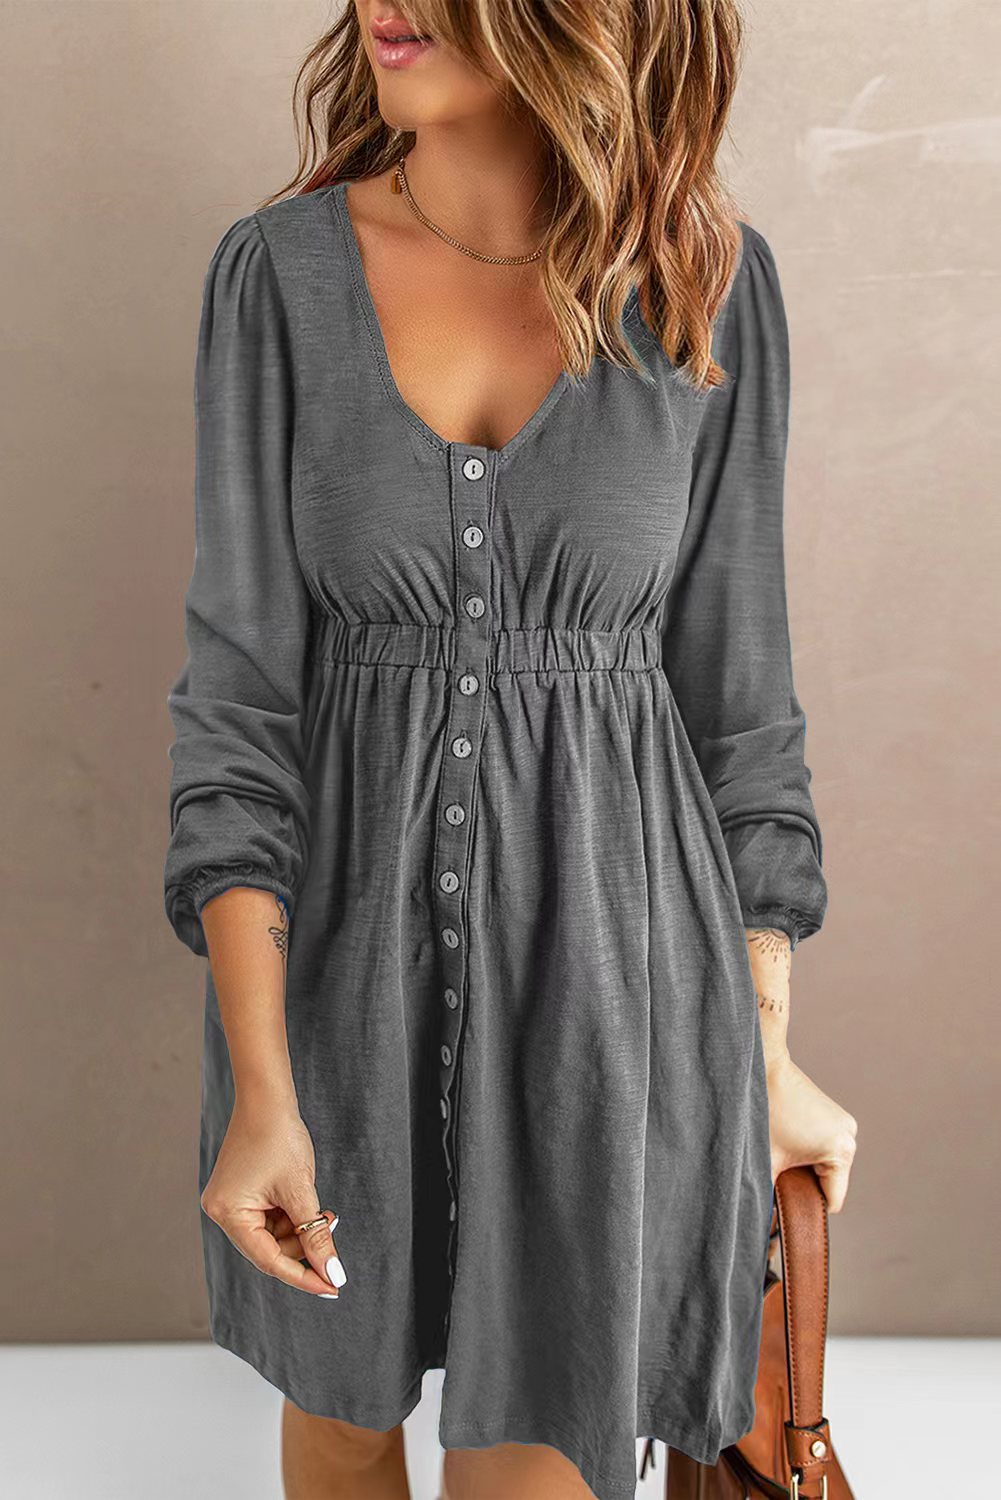 Fall In To Me Scoop Neck Empire Waist Long Sleeve Dress